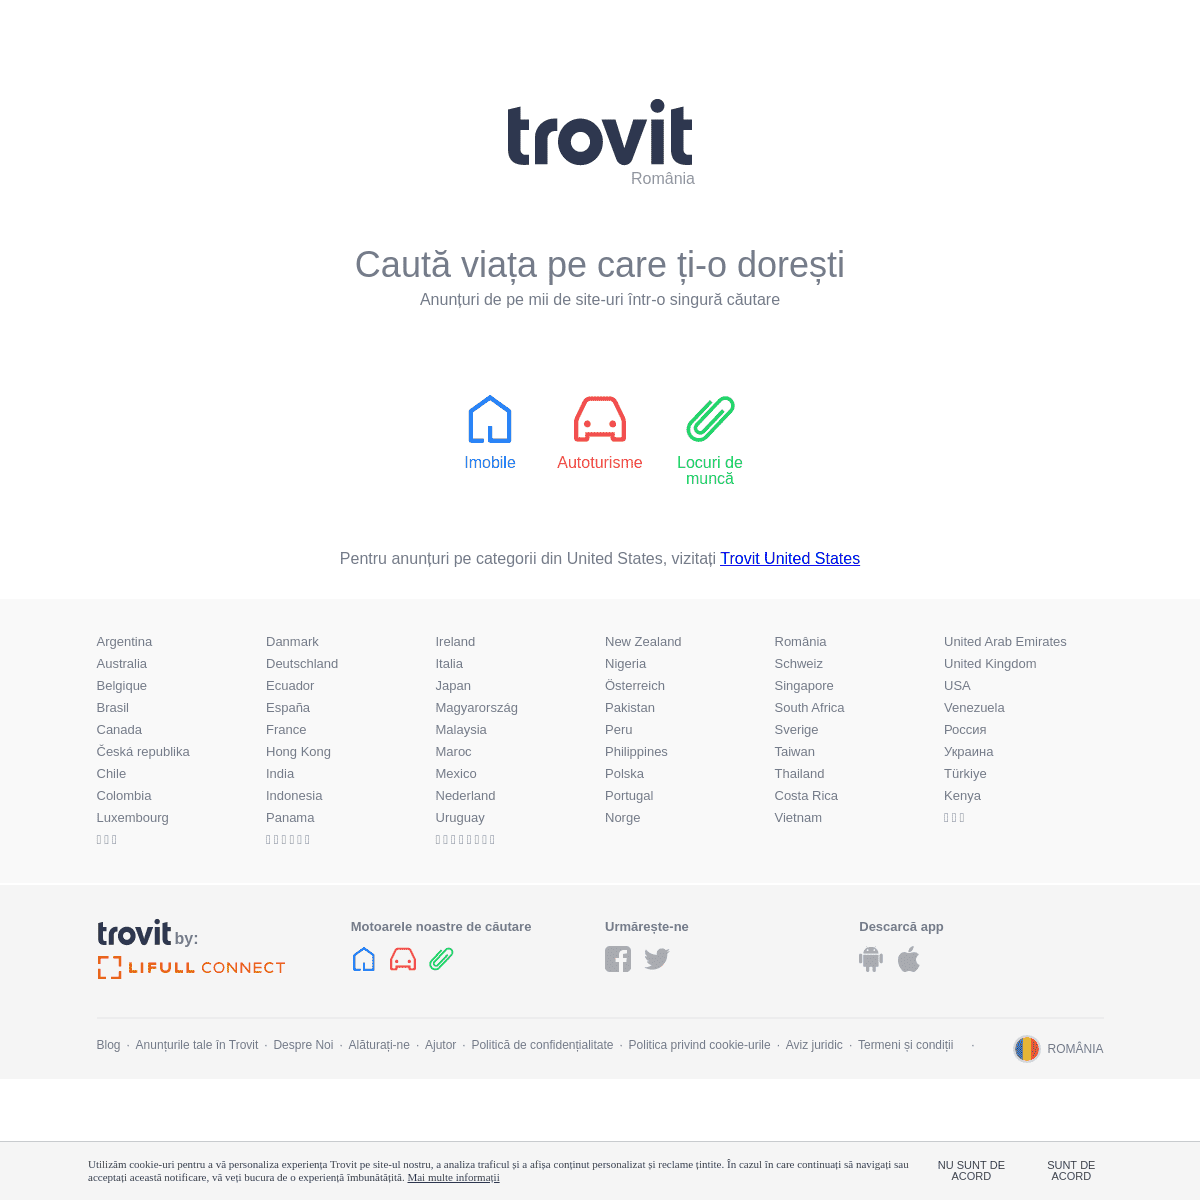 A complete backup of trovit.ro